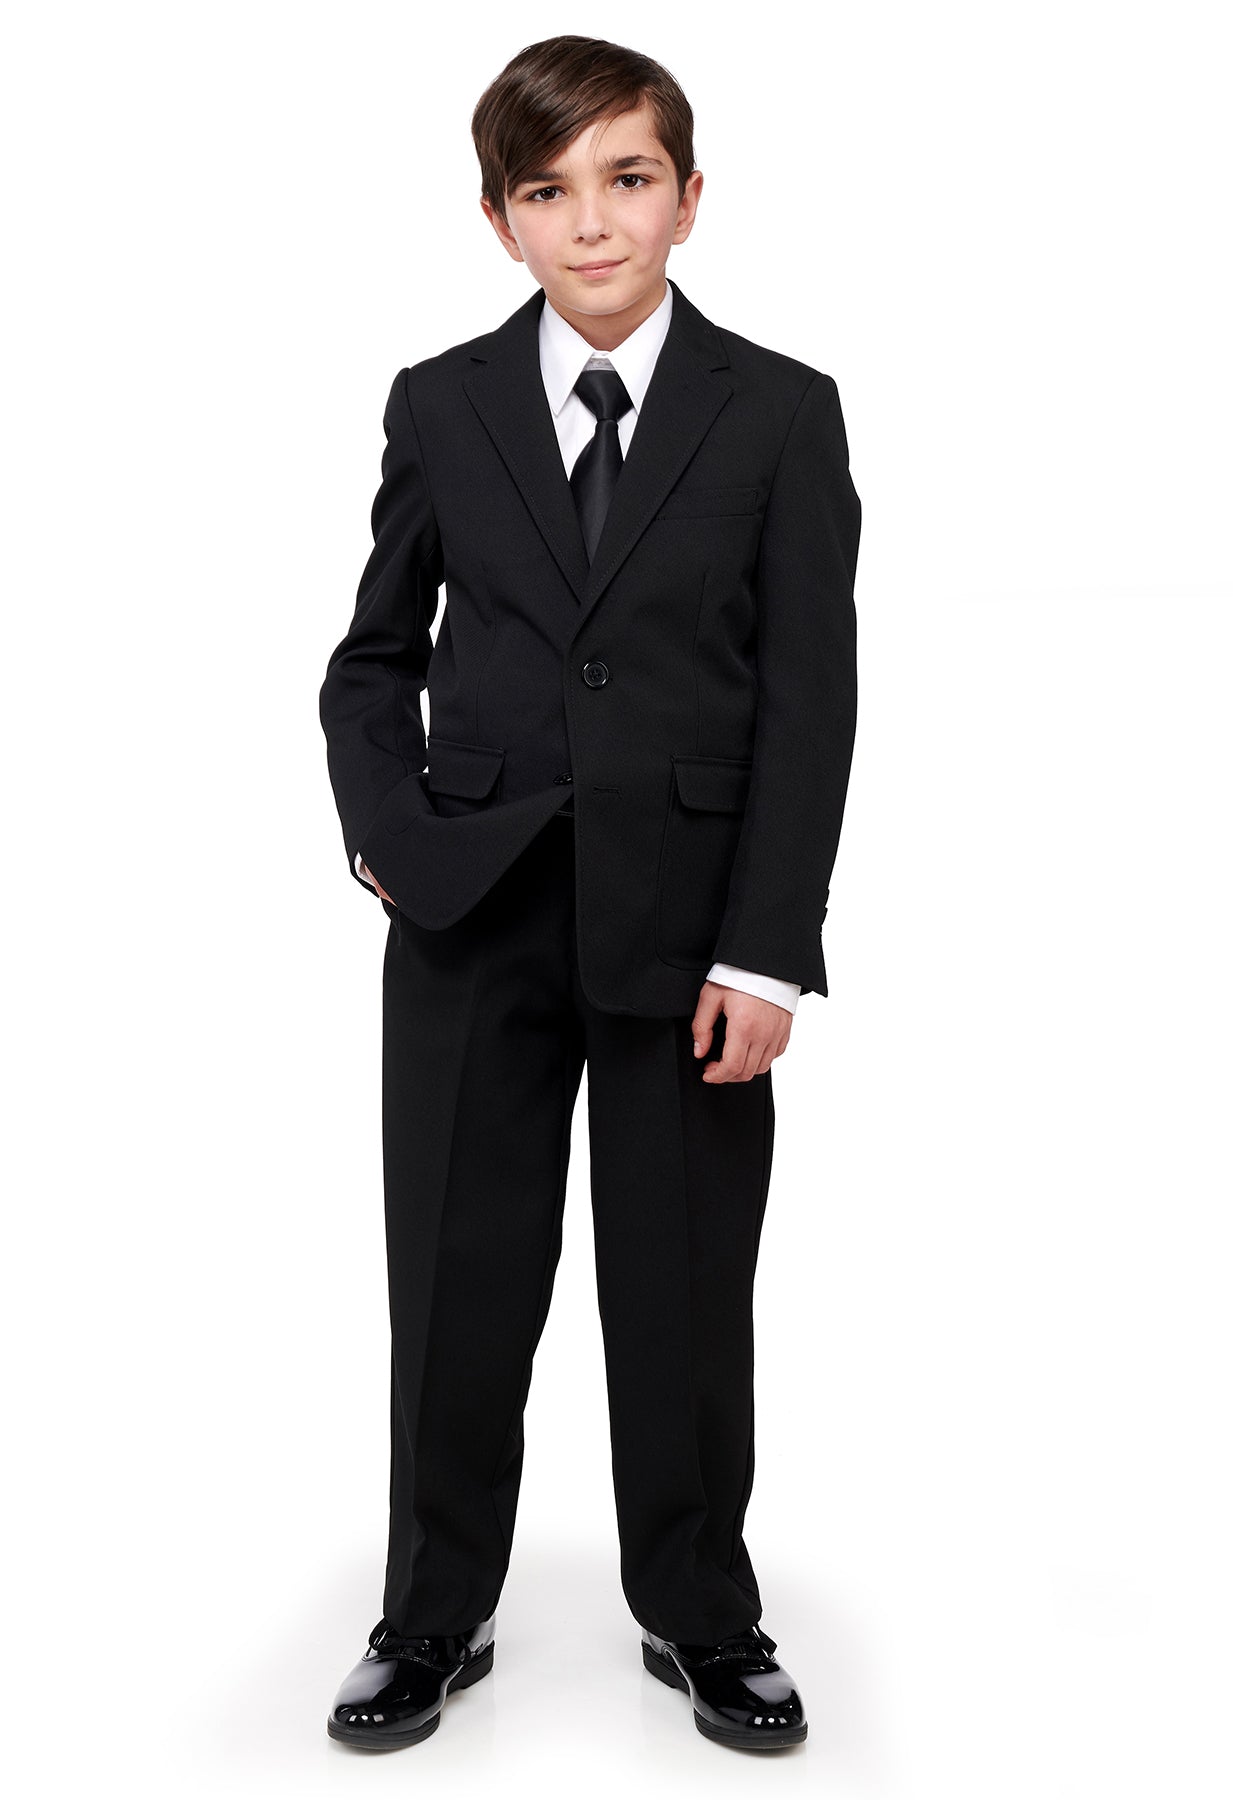 BARRY (Style #3024B) - Boys Suit Package